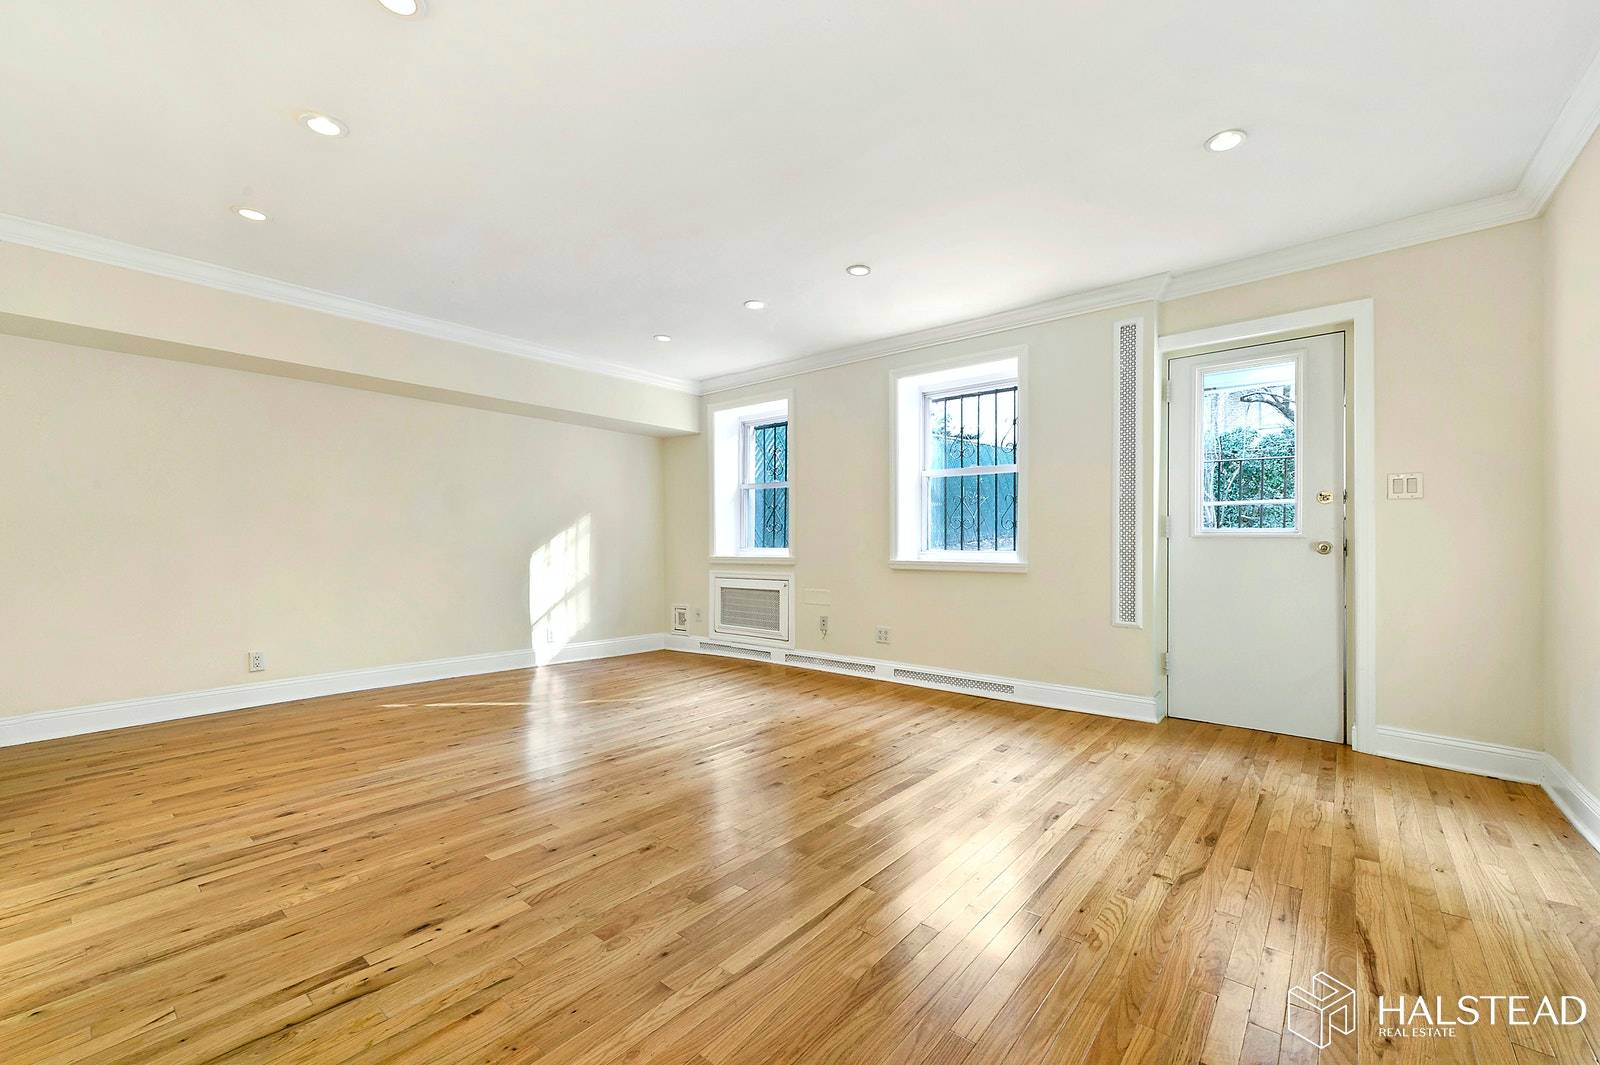 212 East 31st Street is a 4 story, 20 foot wide townhouse located on a lovely tree lined street in Kips Bay.